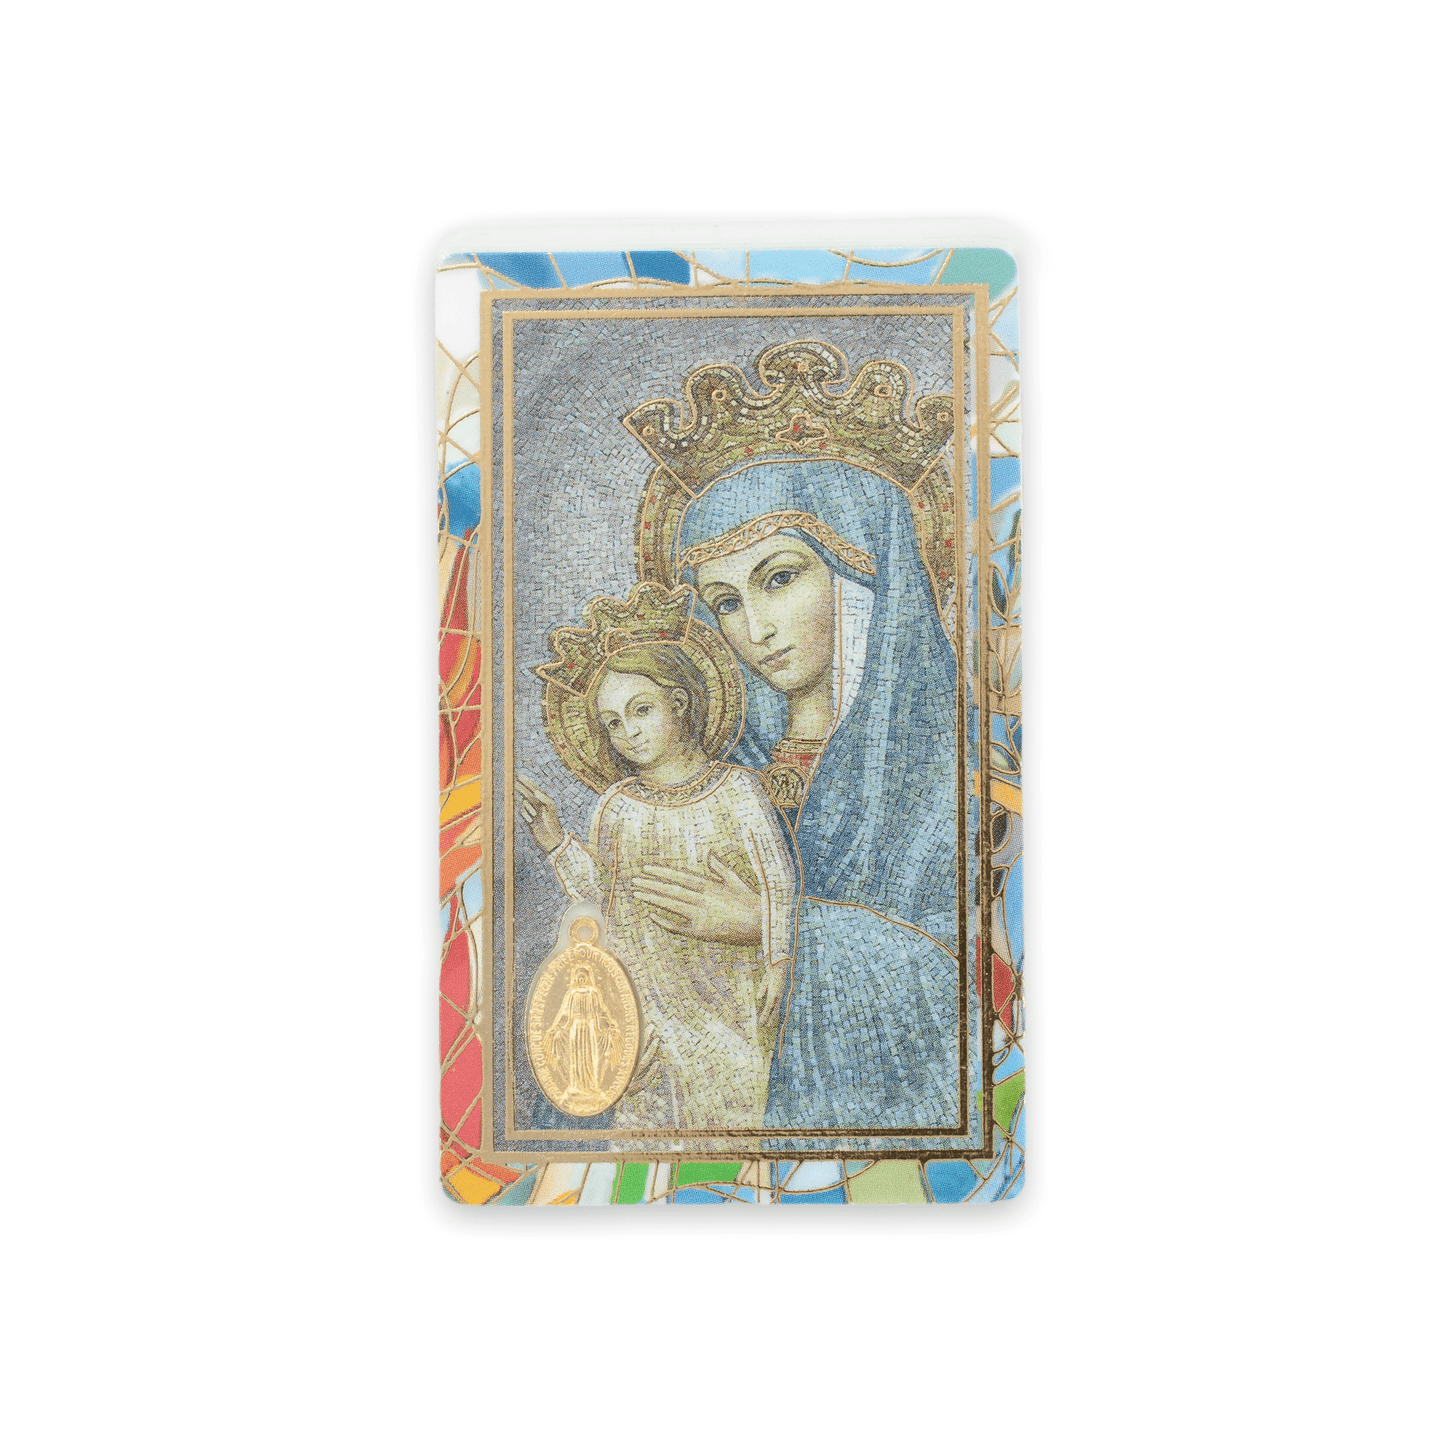 MONDO CATTOLICO Mater Ecclesiae Plastified Prayer Card and Miraculous Virgin Medal